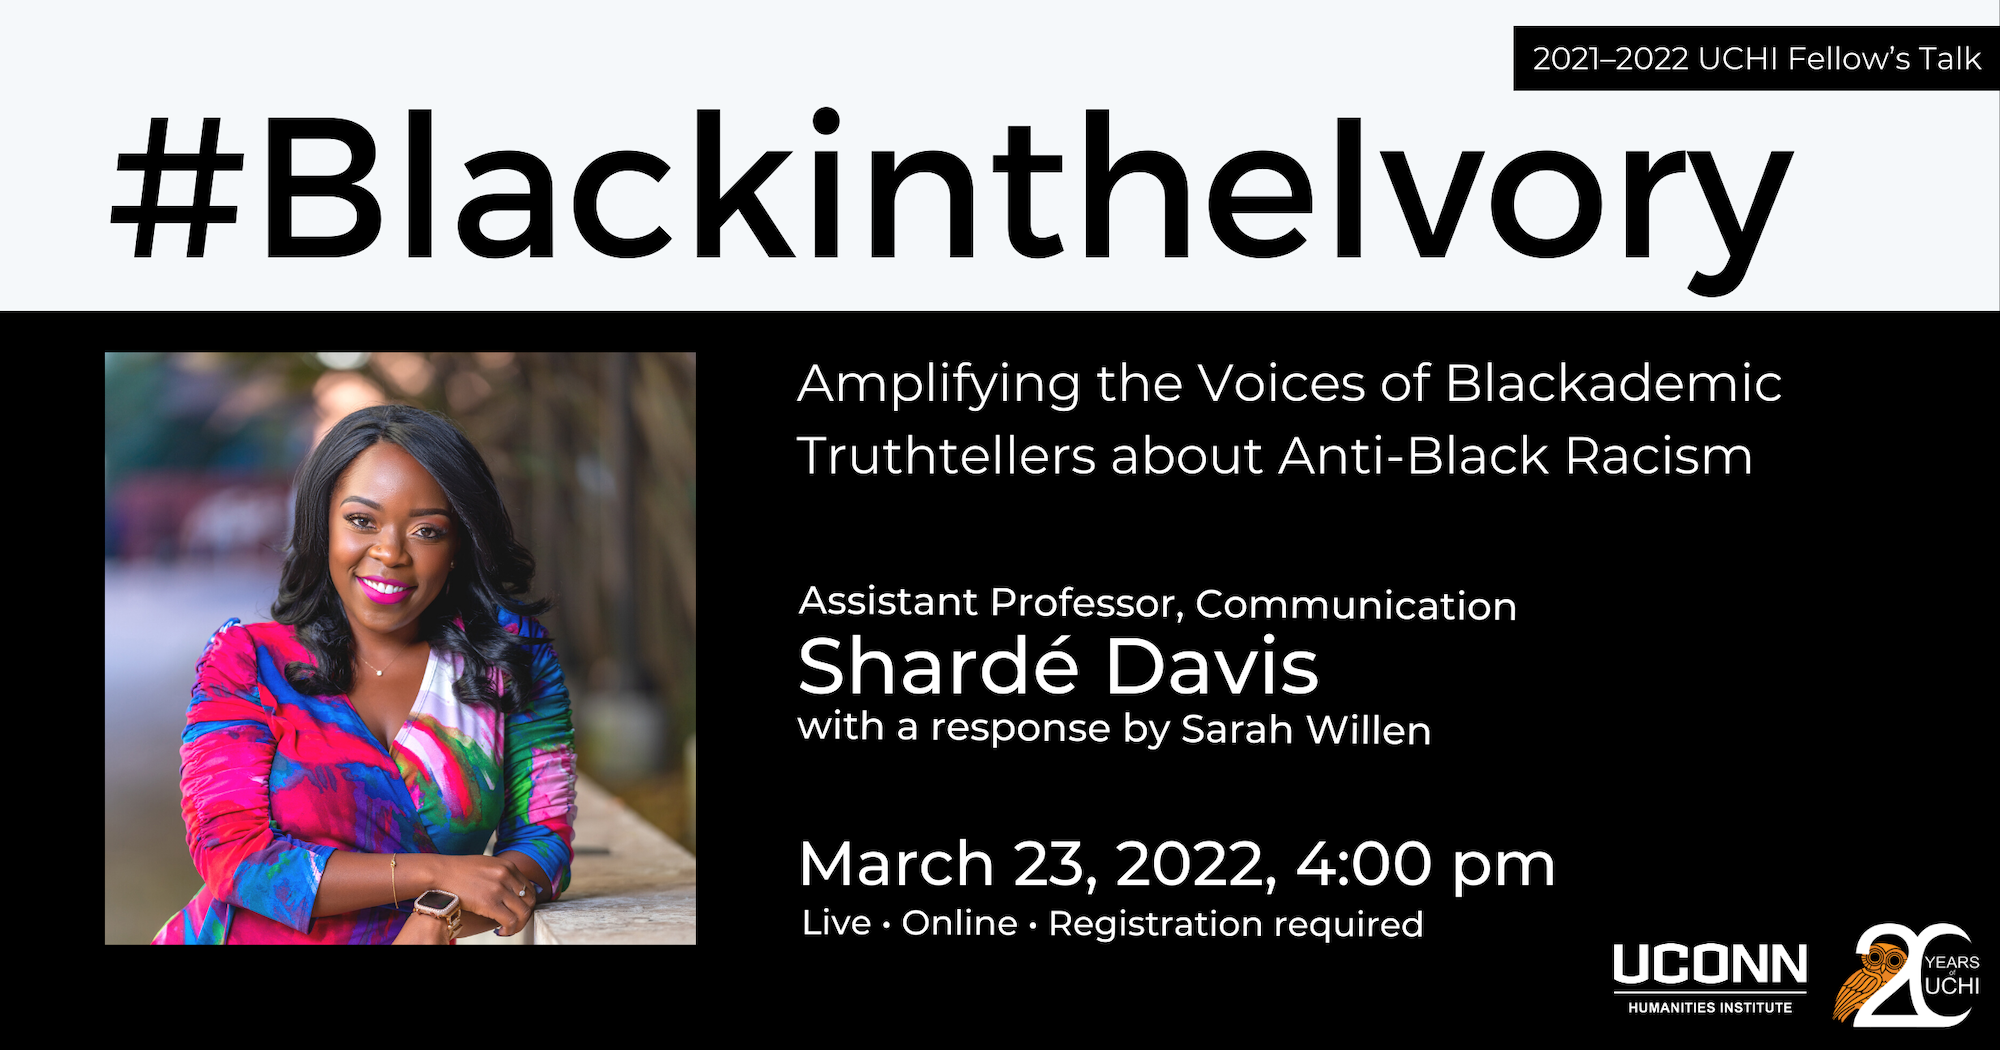 2021–22 UCHI fellow's talk. #BlackintheIvory: Amplifying the Voices of Blackademic Truthtellers about Anti-Black Racism. Assistant Professor, Communications, Shardé Davis, with a response by Sarah Willen. March 23, 2022, 4:00pm. Live. Online. Registration required.